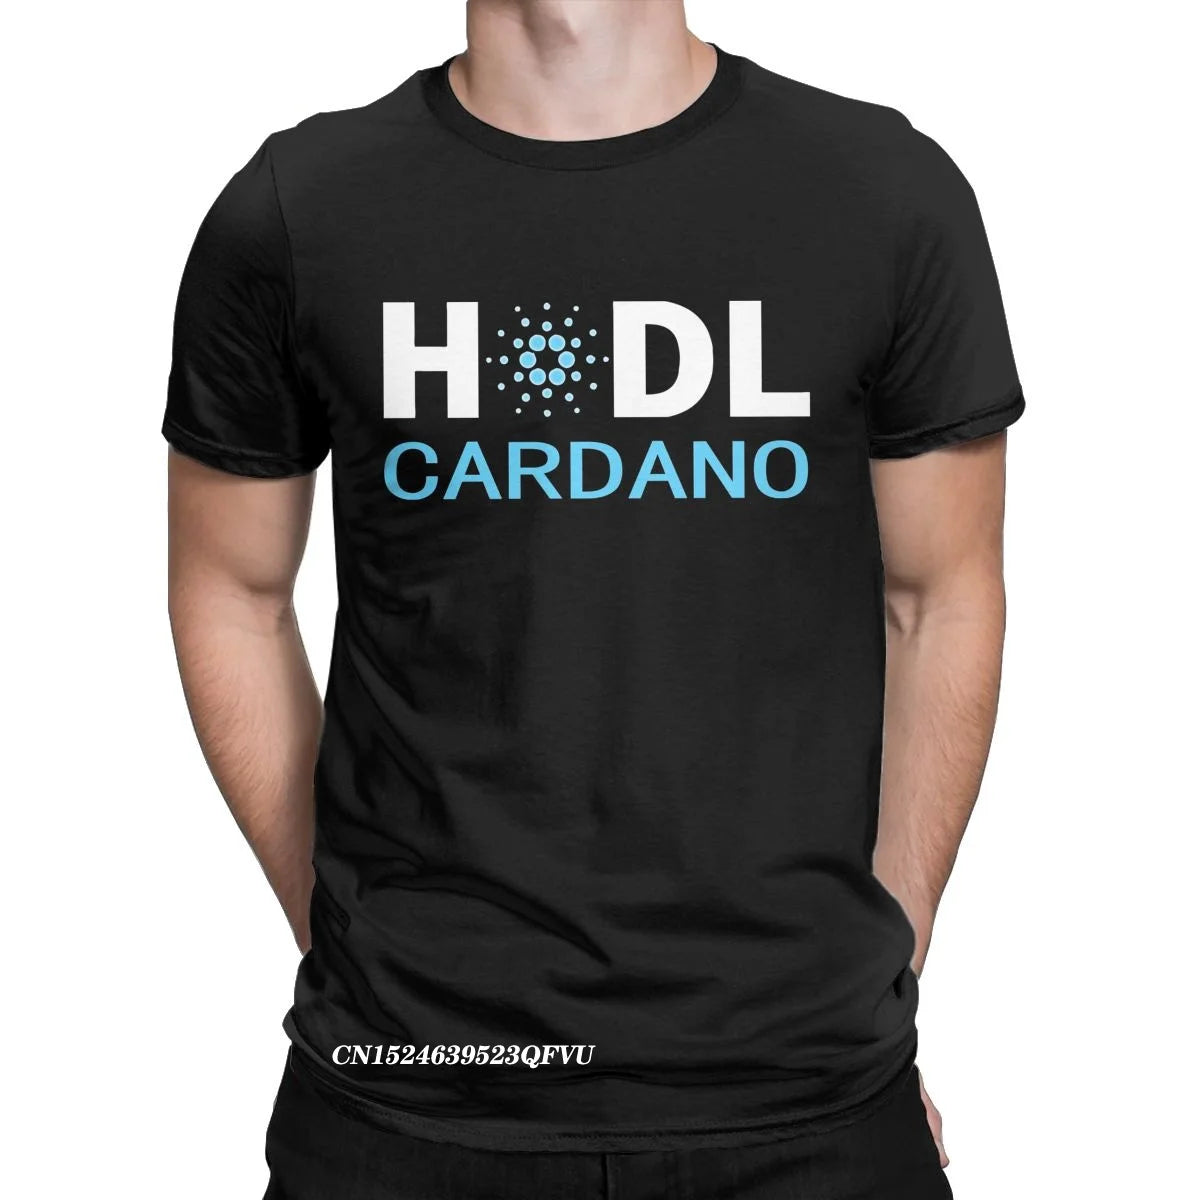 Casual Cardano Hodl T-Shirts Men Women's Round Collar Cotton Tops T Shirts ADA Crypto Coin Cryptocurrency Tee Shirt Summer